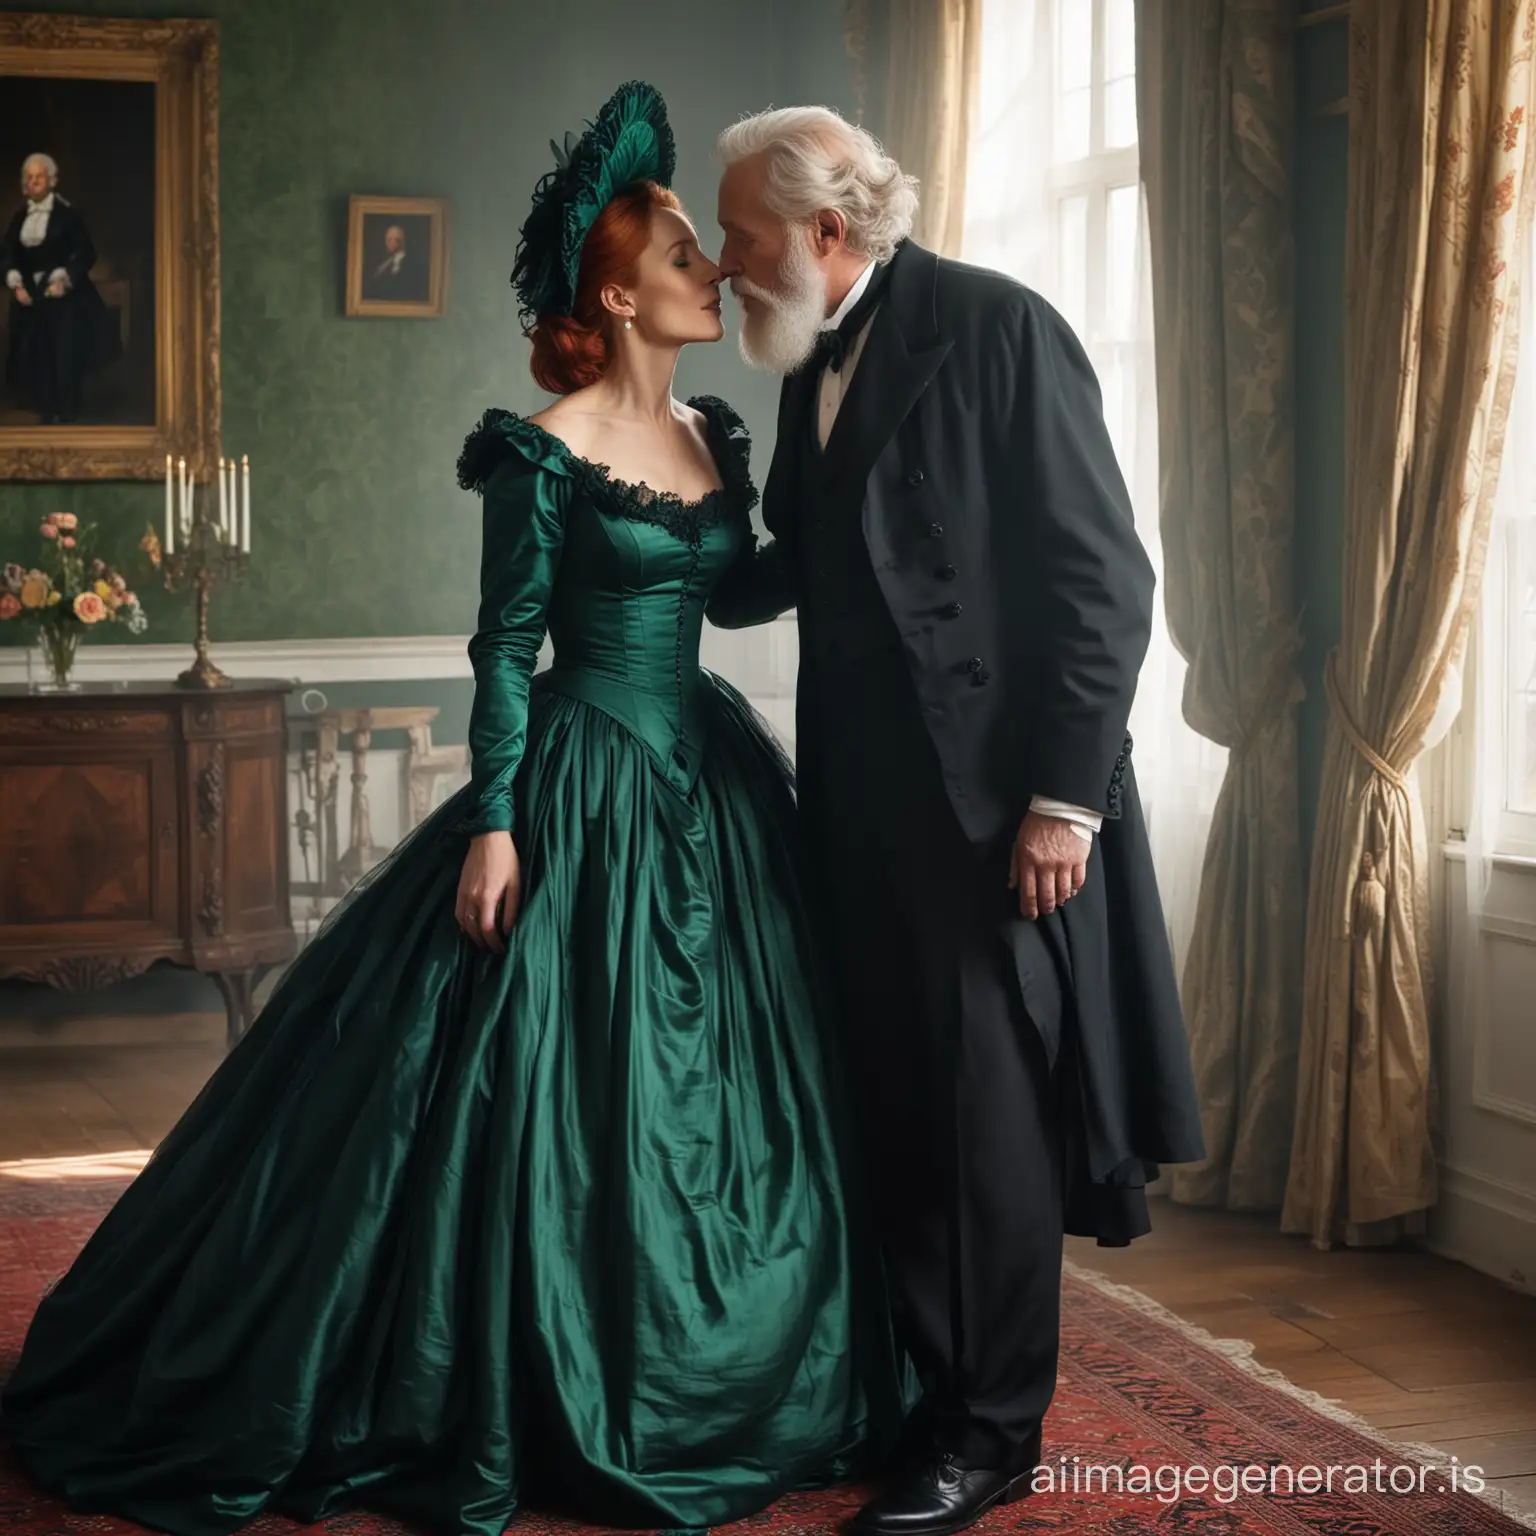 Romantic-Victorian-Wedding-Kiss-RedHaired-Gillian-Anderson-Embraces-Her-Newlywed-Husband